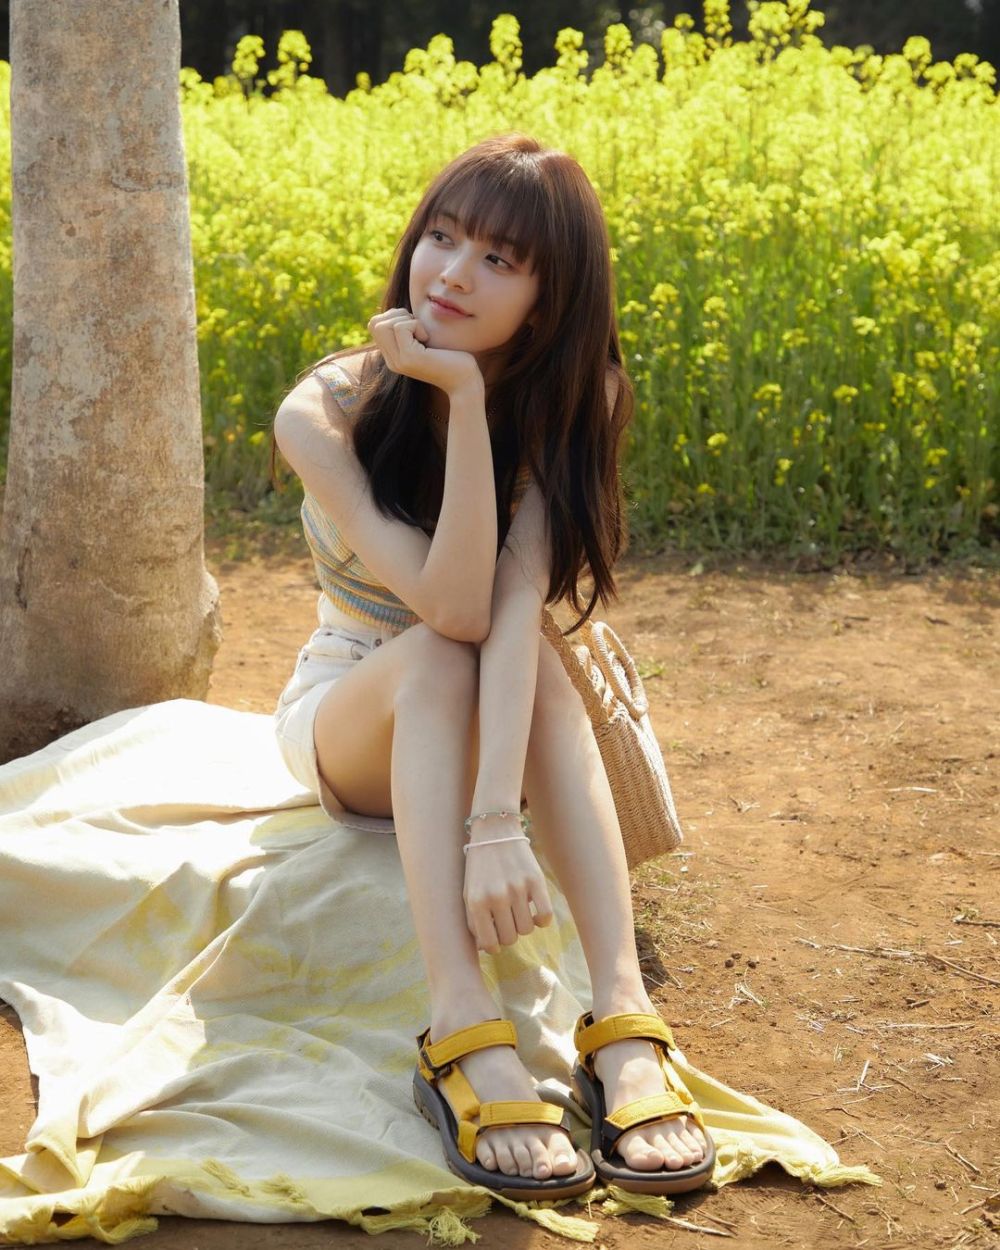 Jung-ui No Sexy and Hottest Photos , Latest Pics